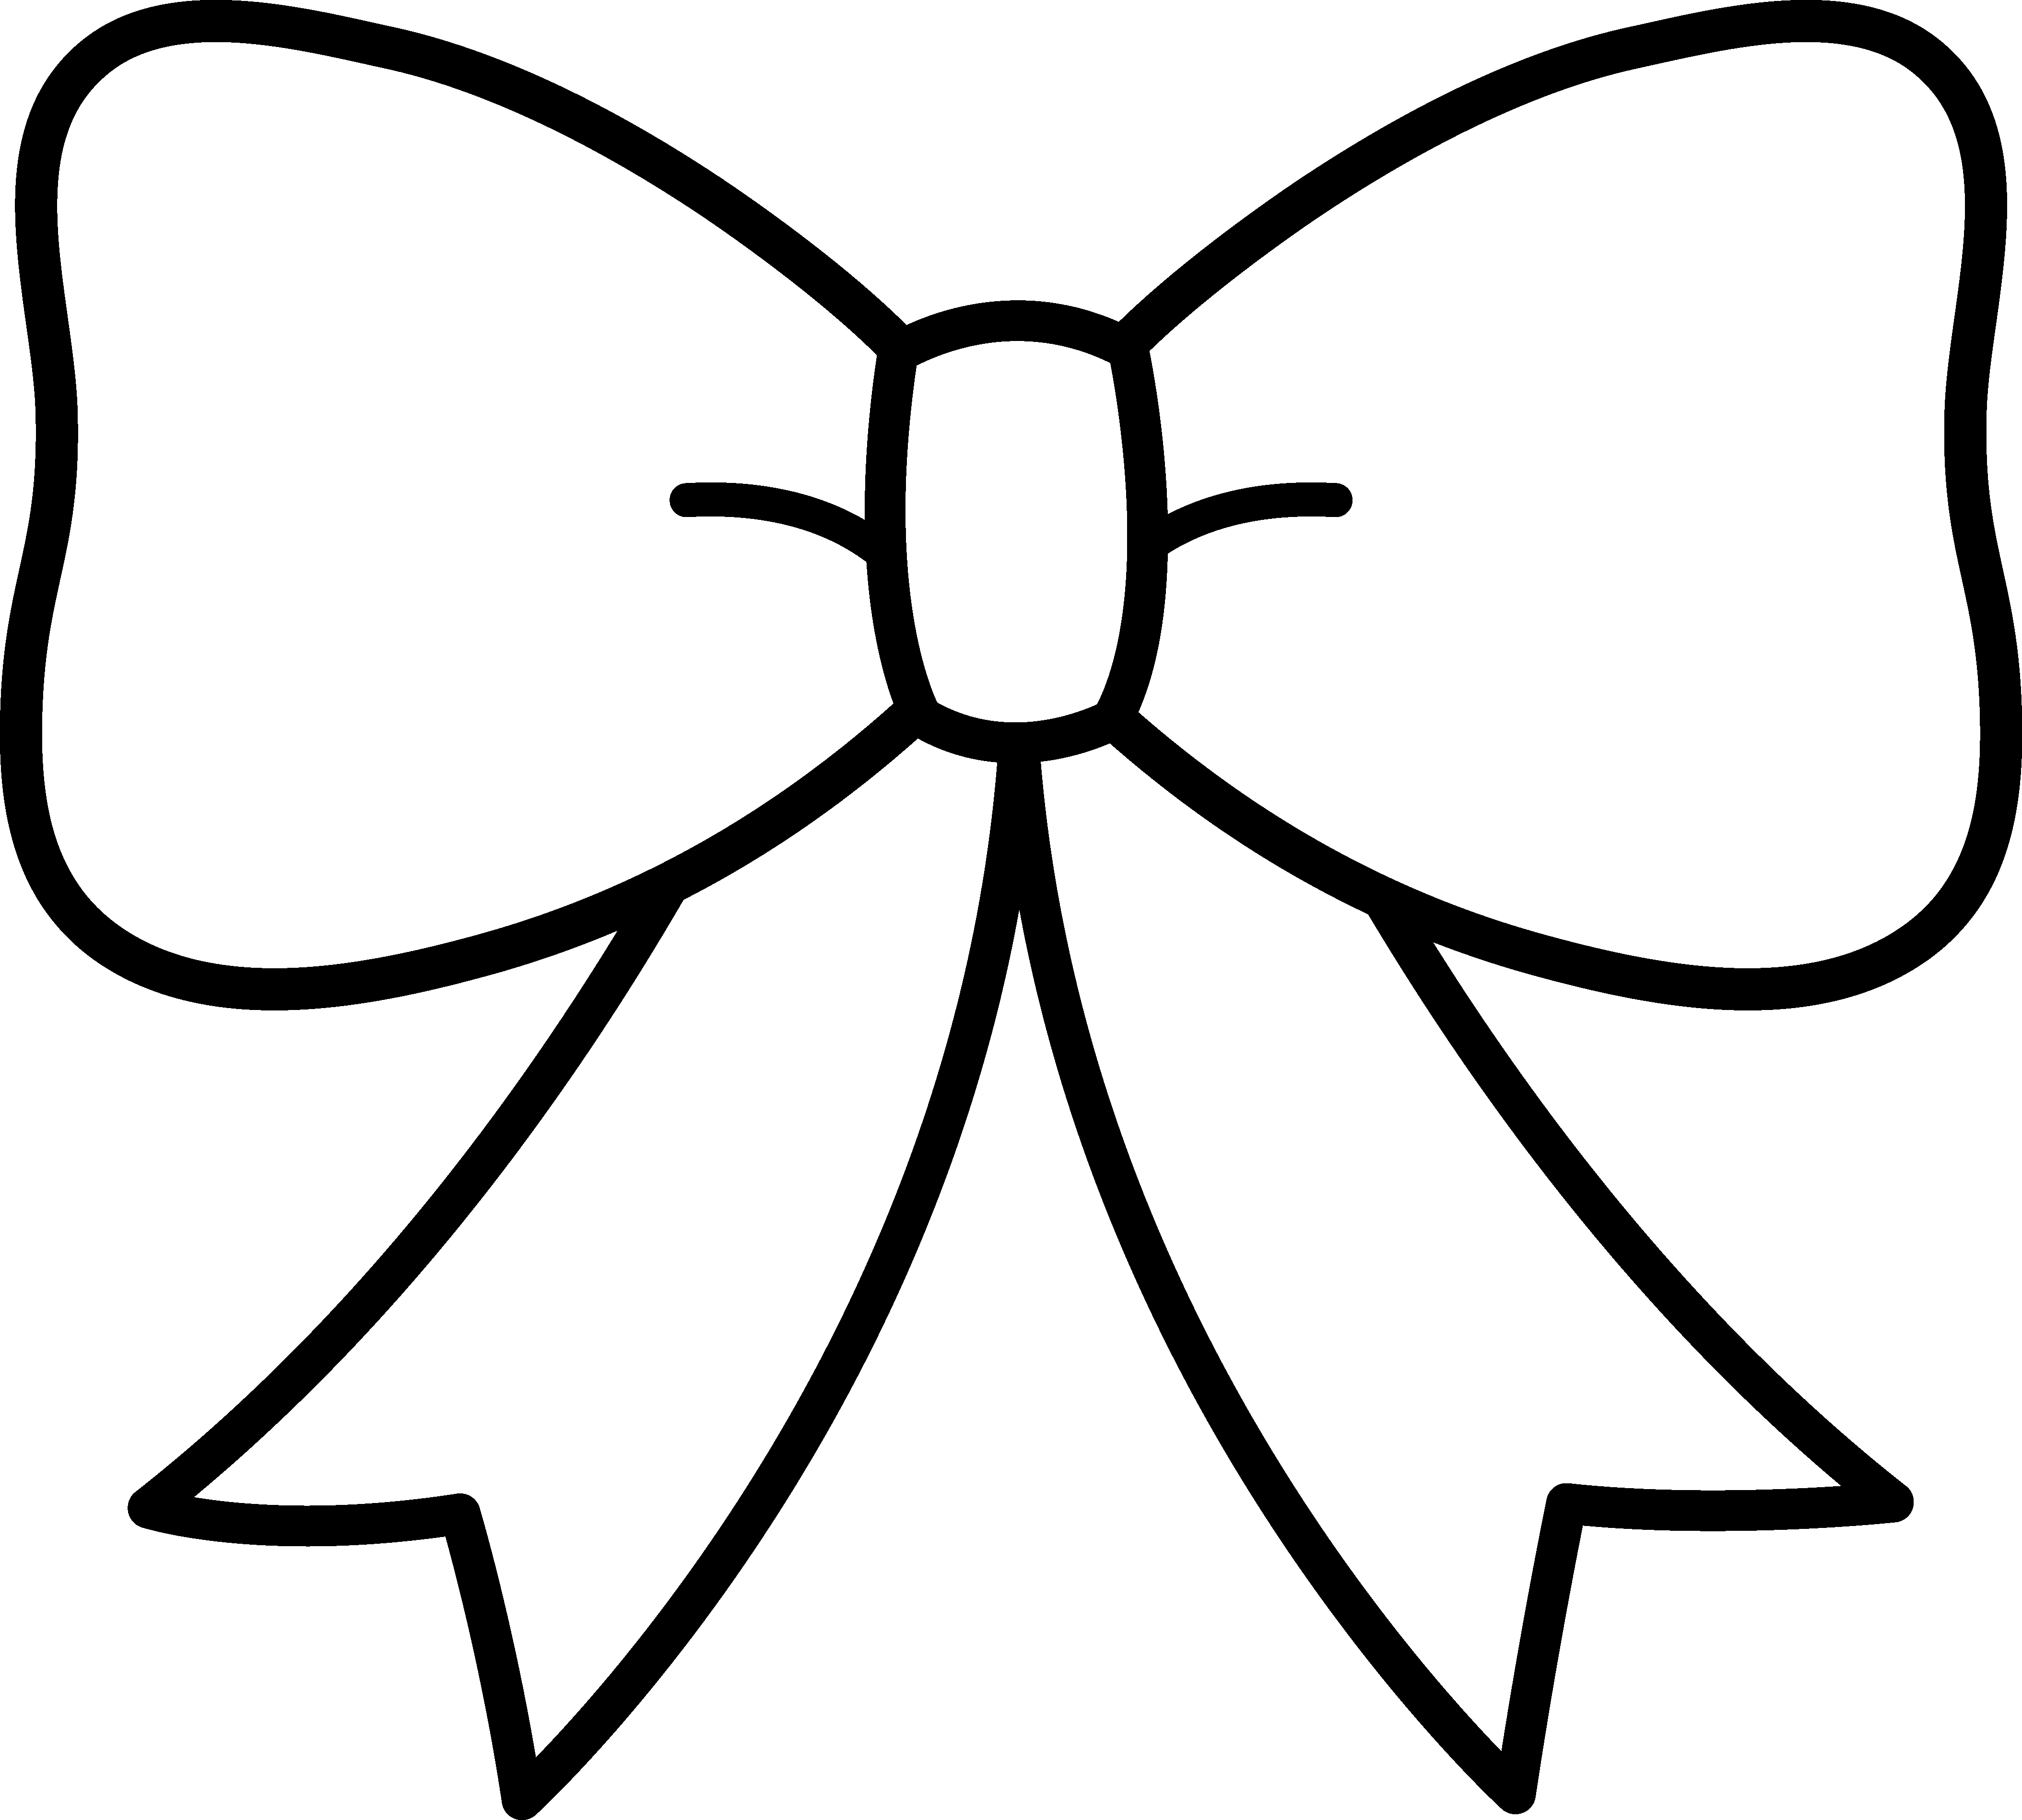 Dad clipart ribbon. Bow black and white